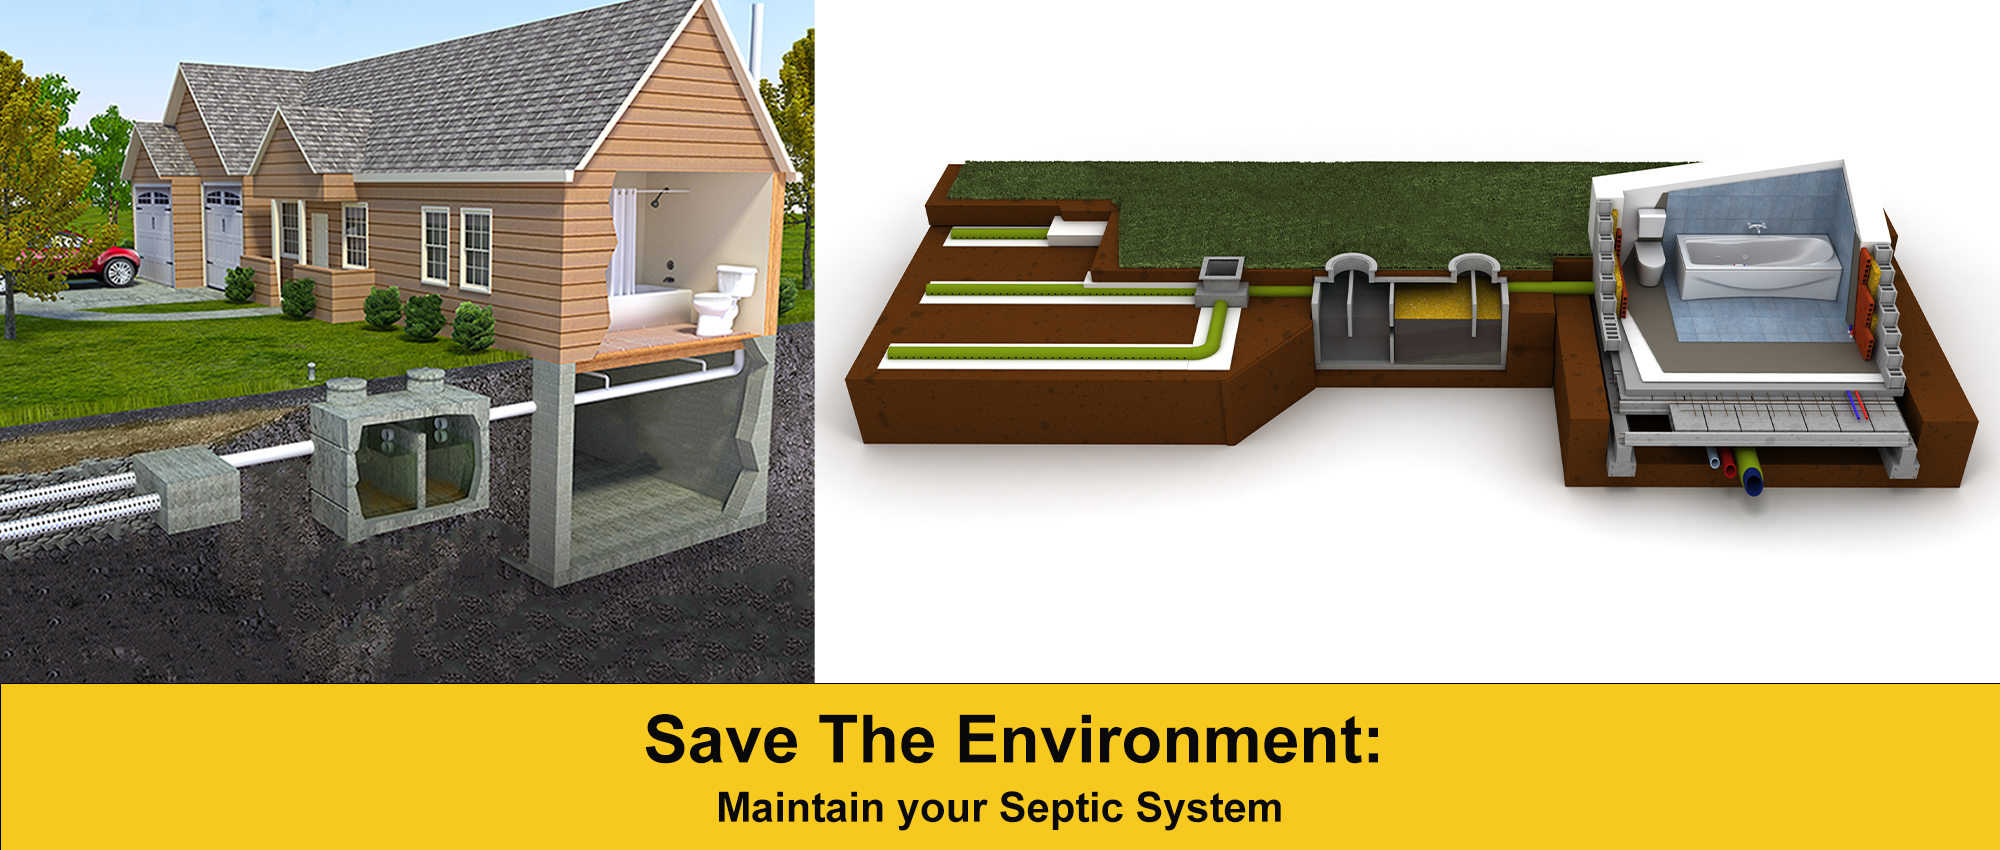 Septic Tank Safety - How To Maintain A Septic Tank